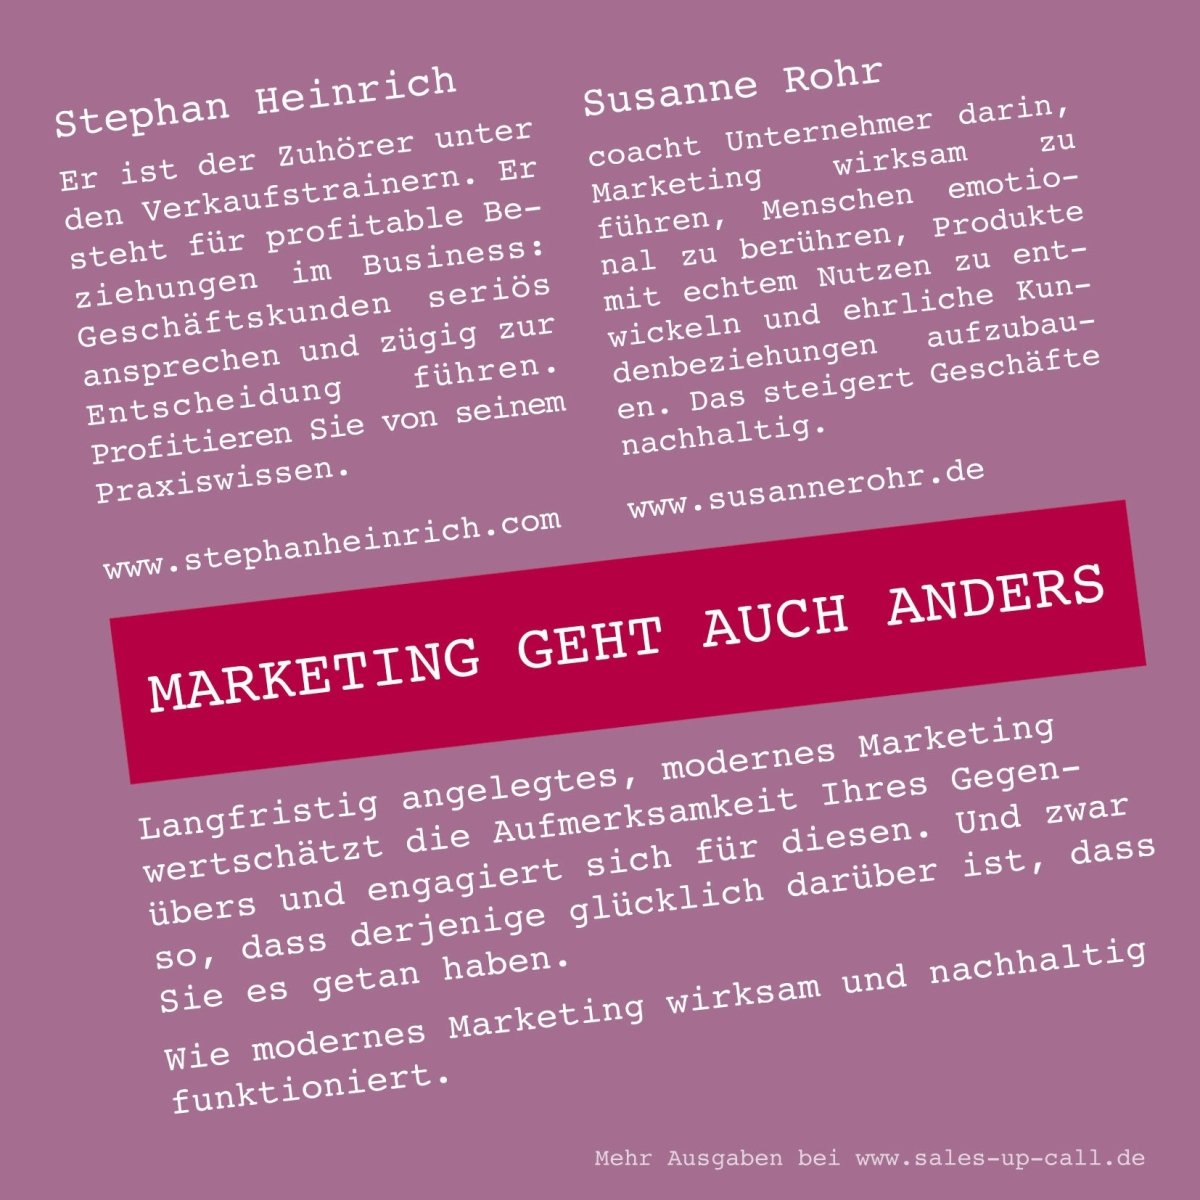 Marketing geht auch anders - Sales-up-Call - Stephan Heinrich